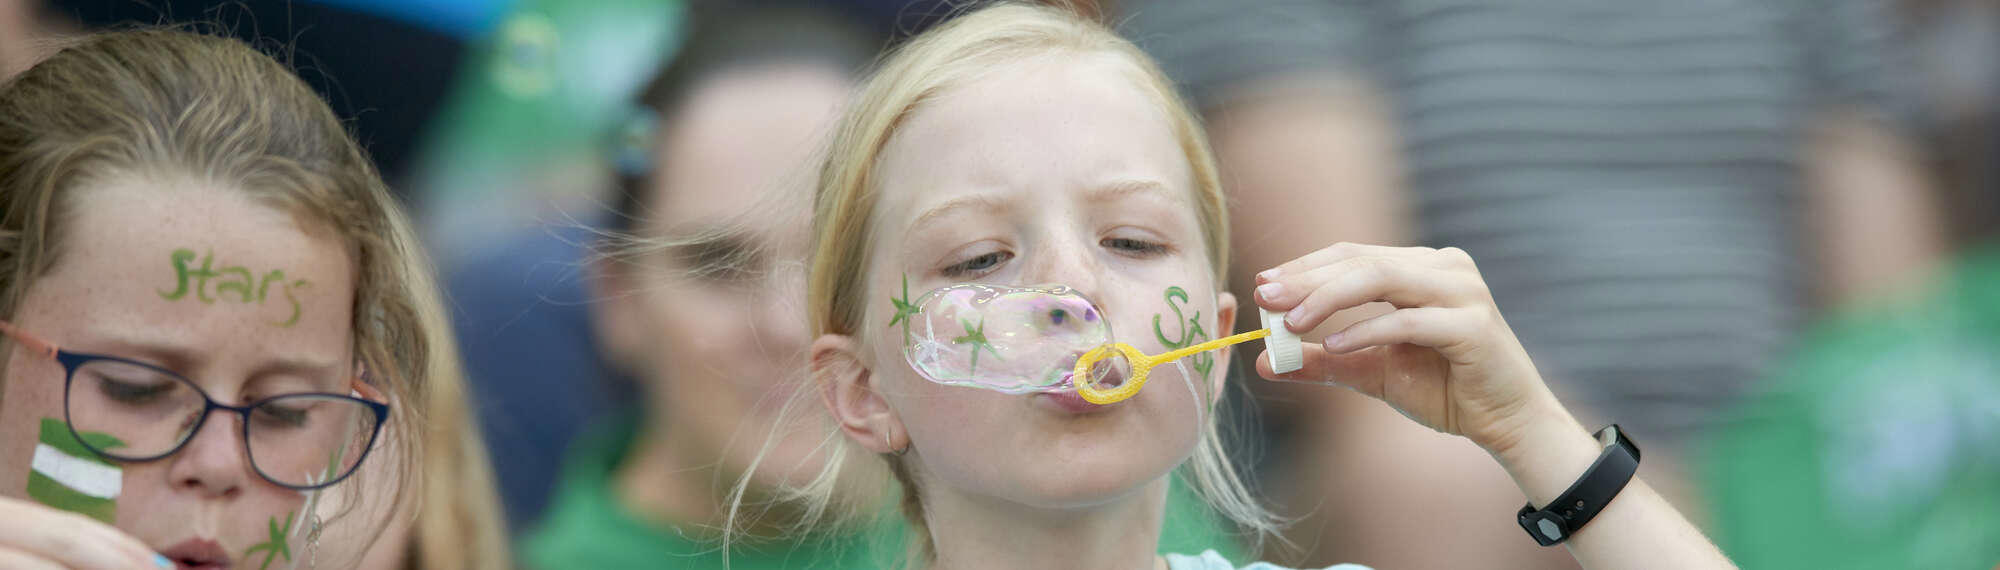 Young girl blowing bubbles with bubble wand at large event